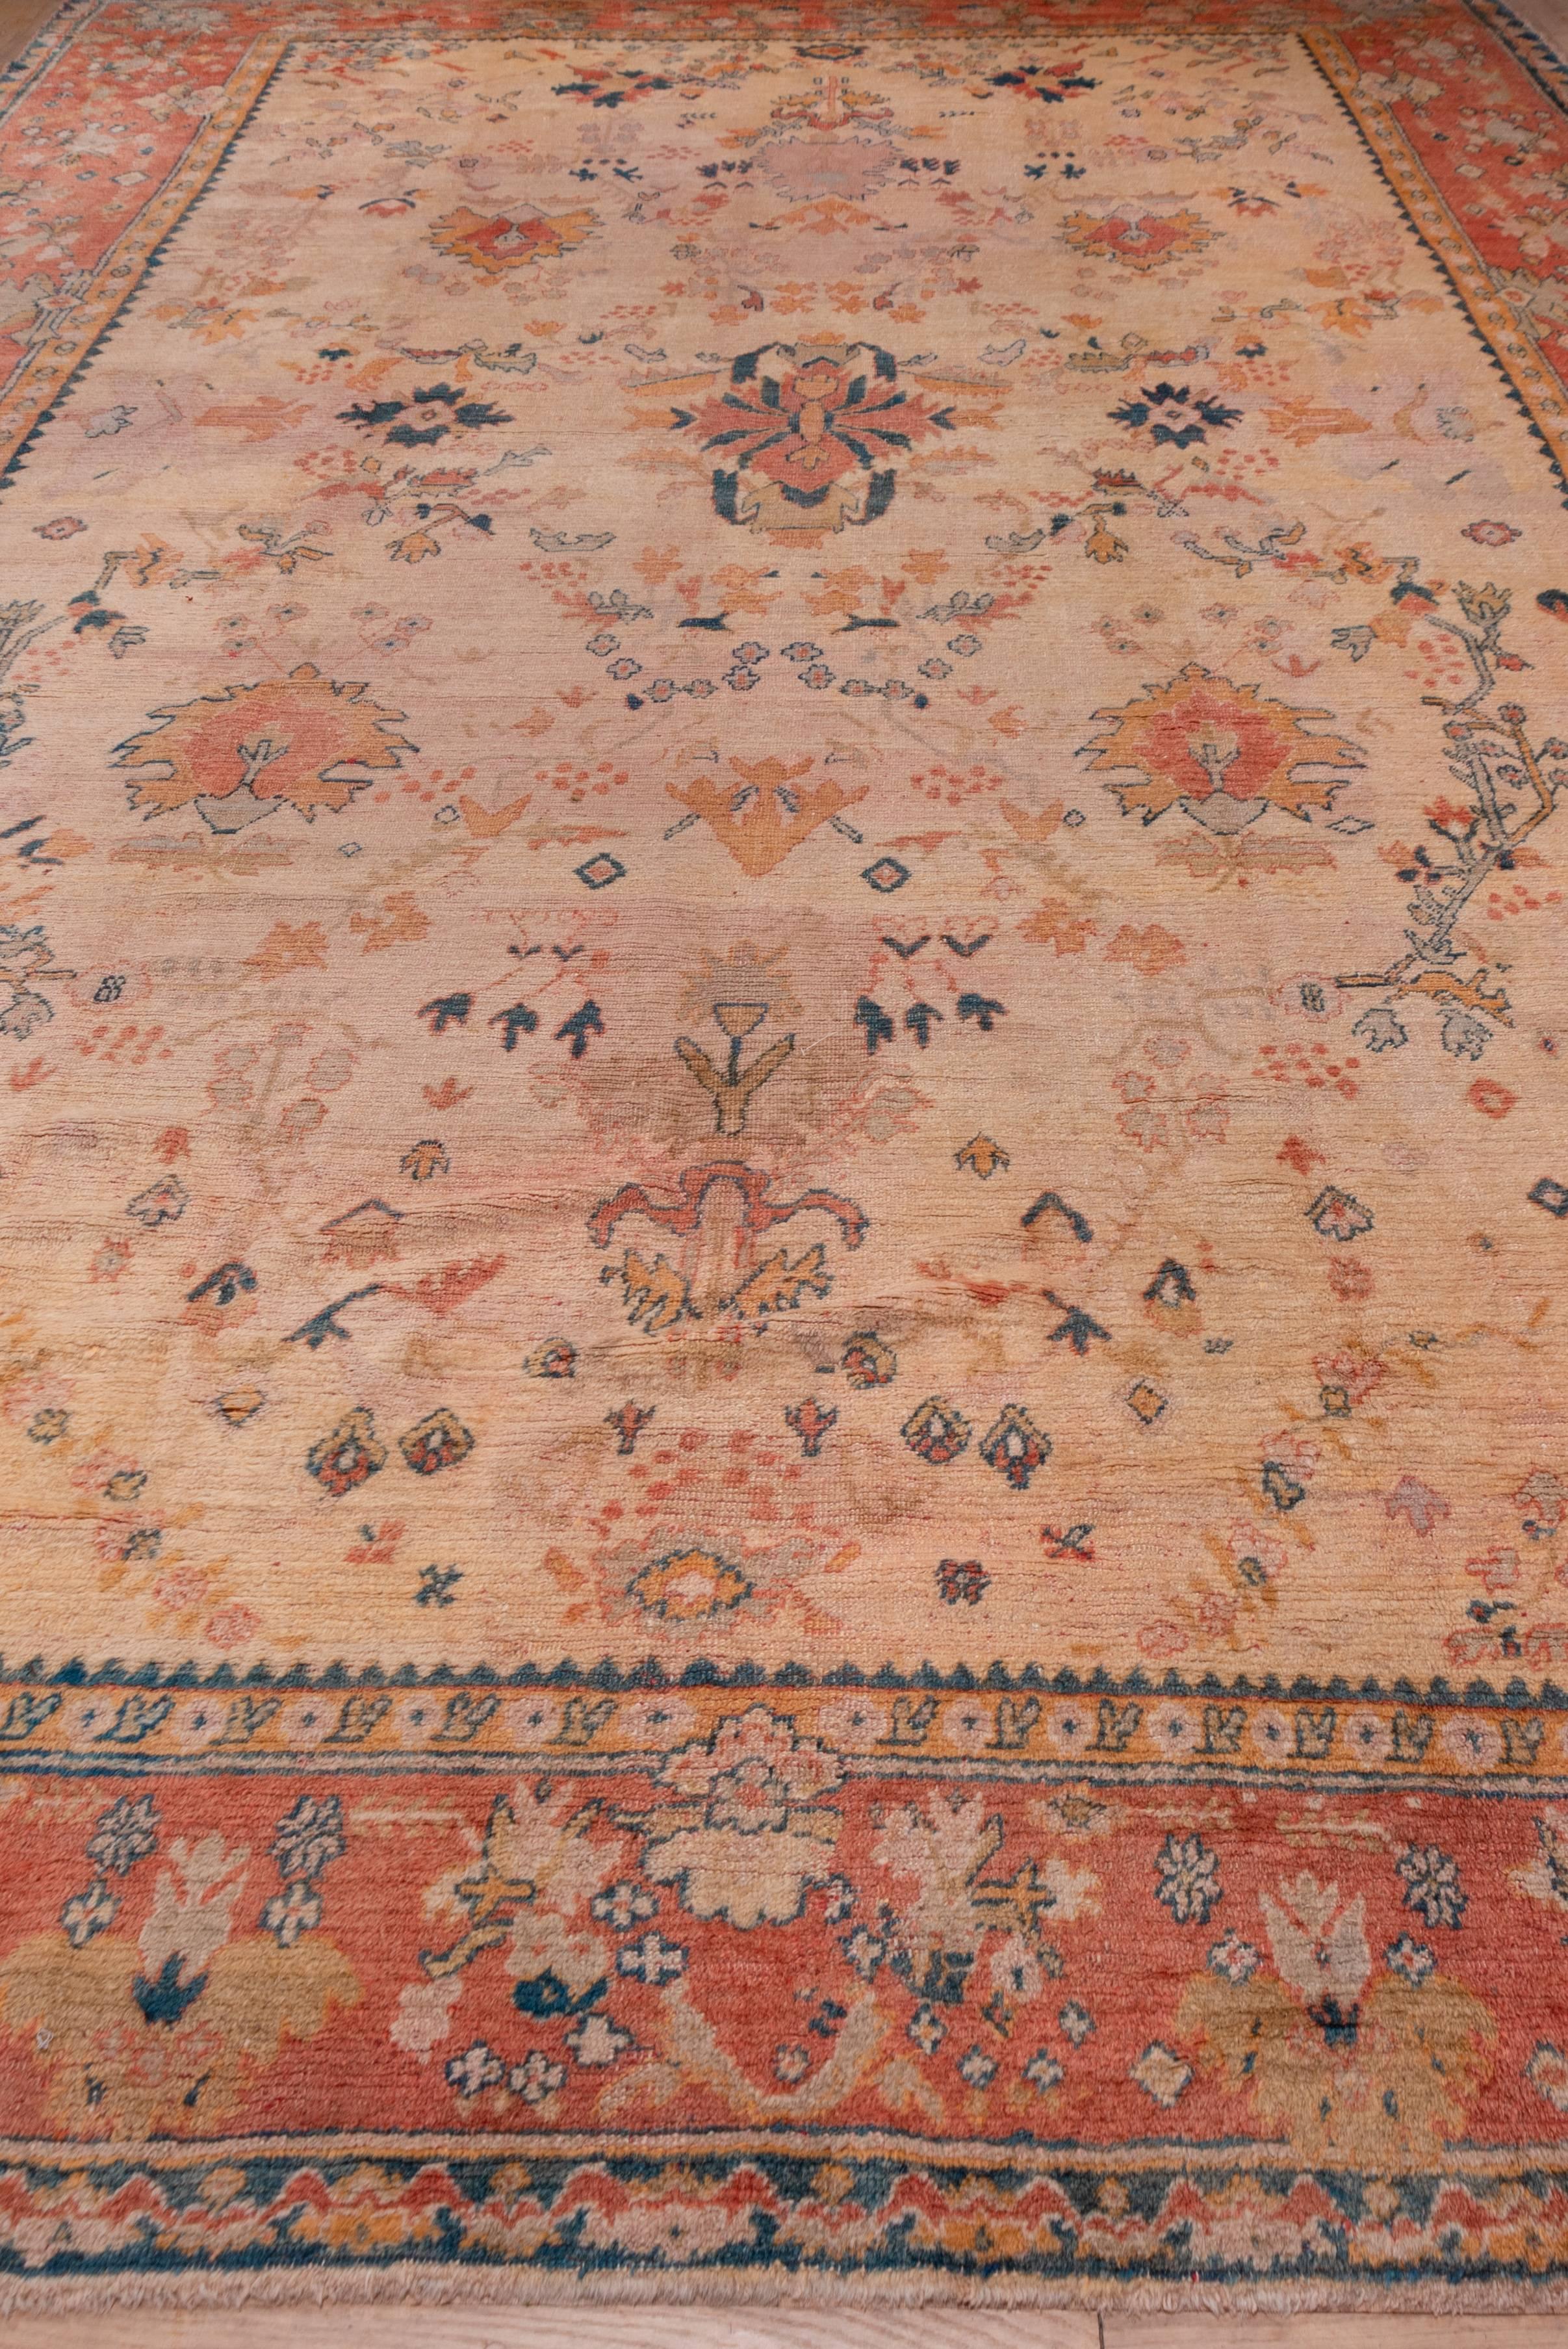 The straw-ivory field of this western Anatolian town carpet displays a generously spaced pattern of Harshang palmettes, flowering branches, floating leaves and a central sharply serrated leafy medallion. The peach border displays broadly drawn